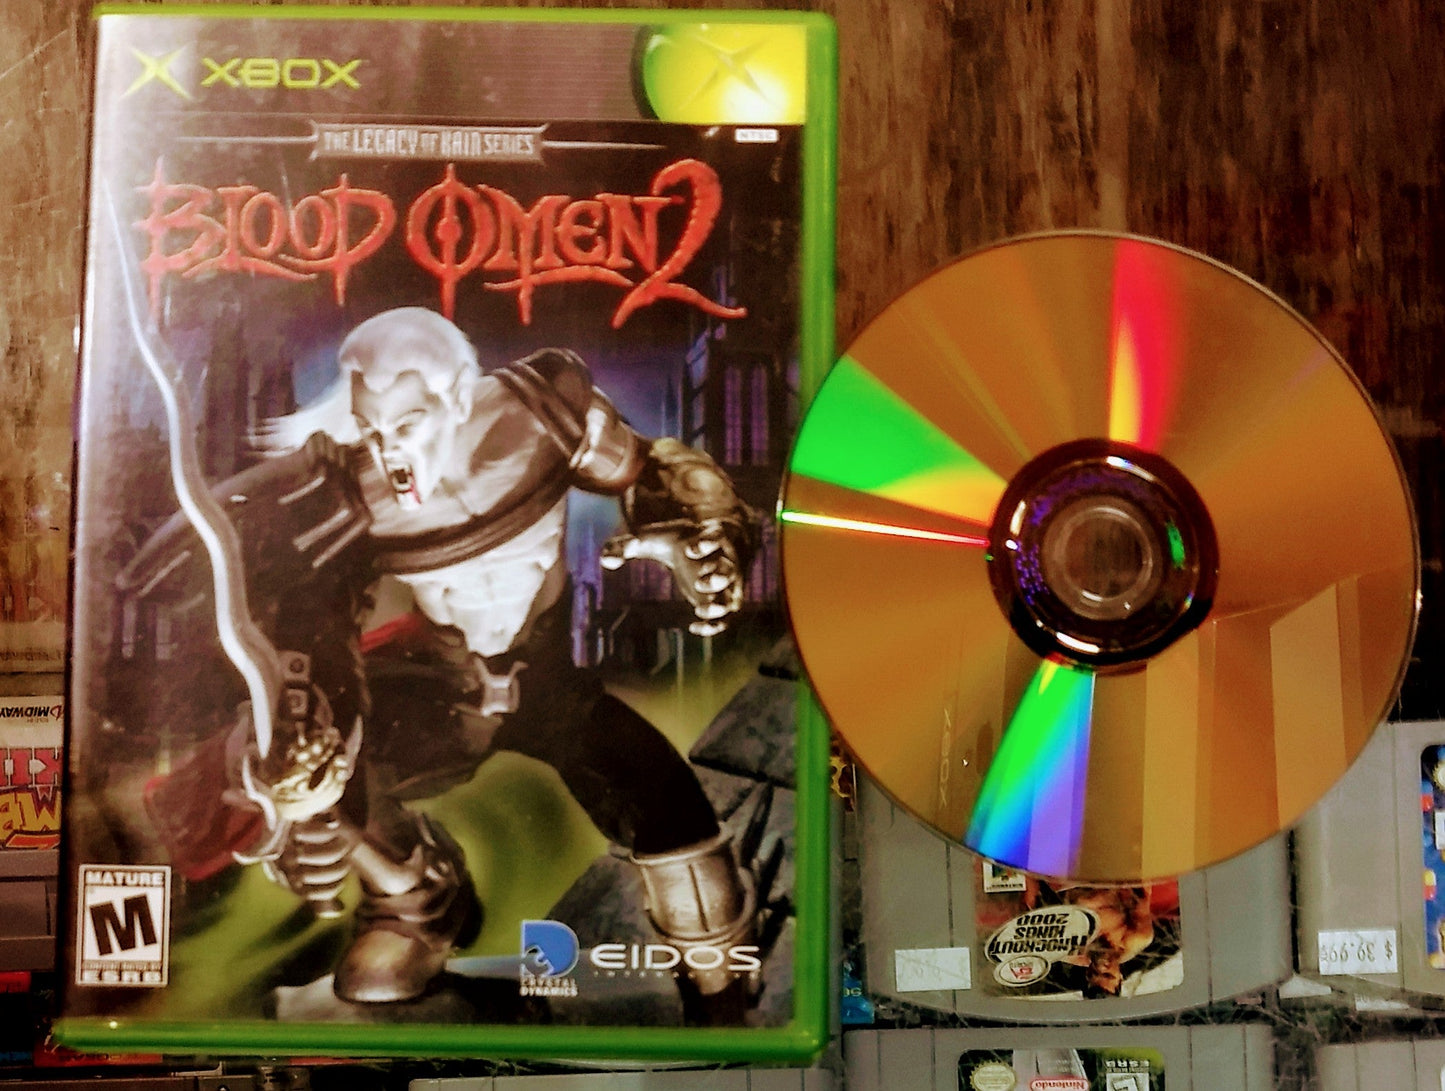 BLOOD OMEN 2: LEGACY OF KAIN XBOX - jeux video game-x